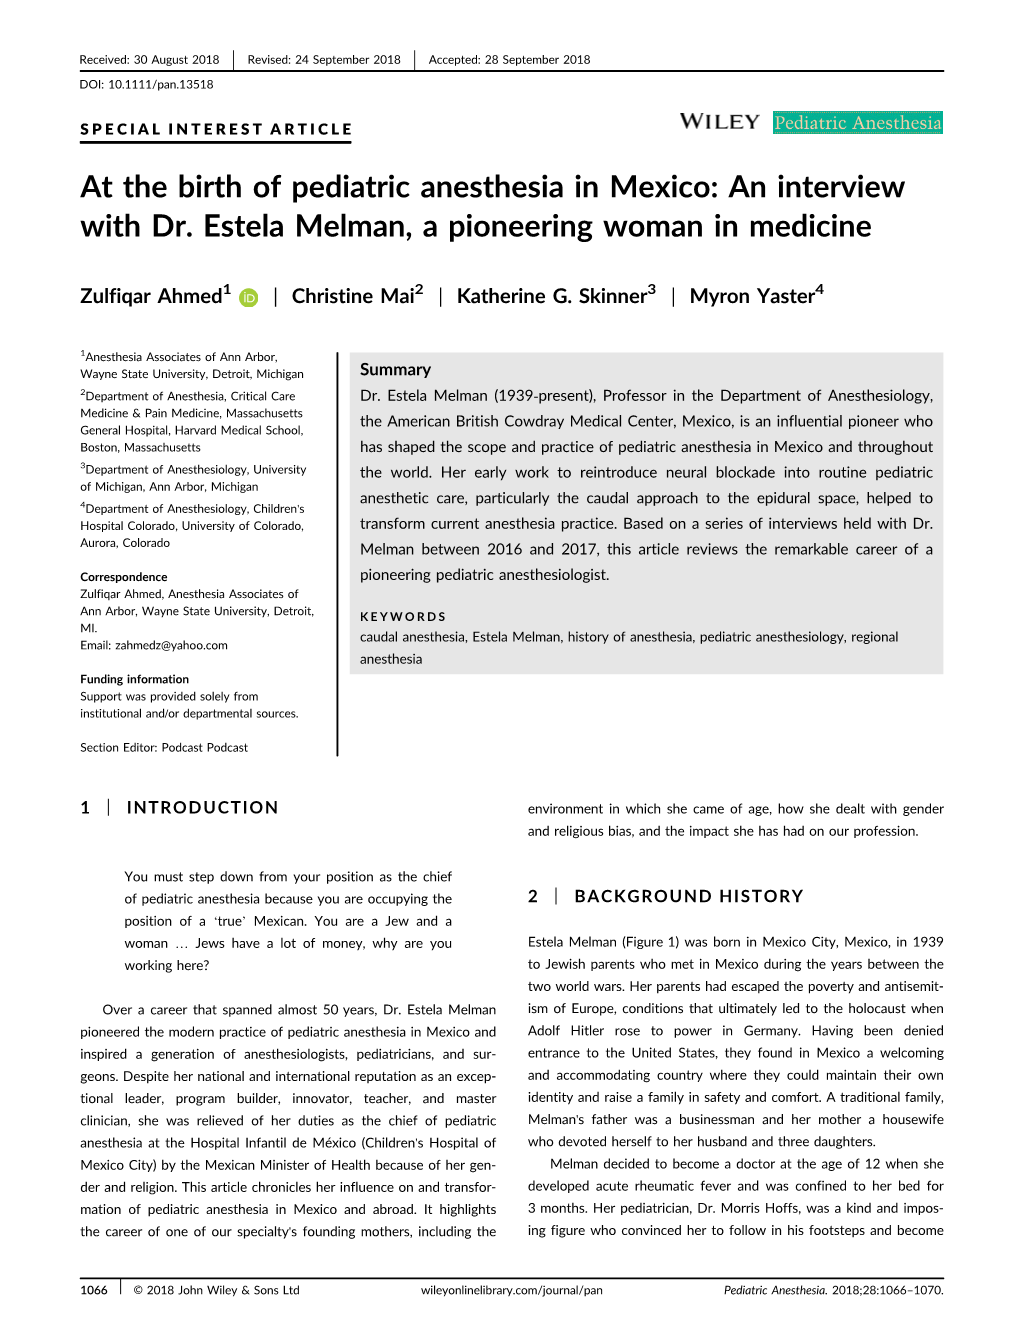 At the Birth of Pediatric Anesthesia in Mexico: an Interview with Dr